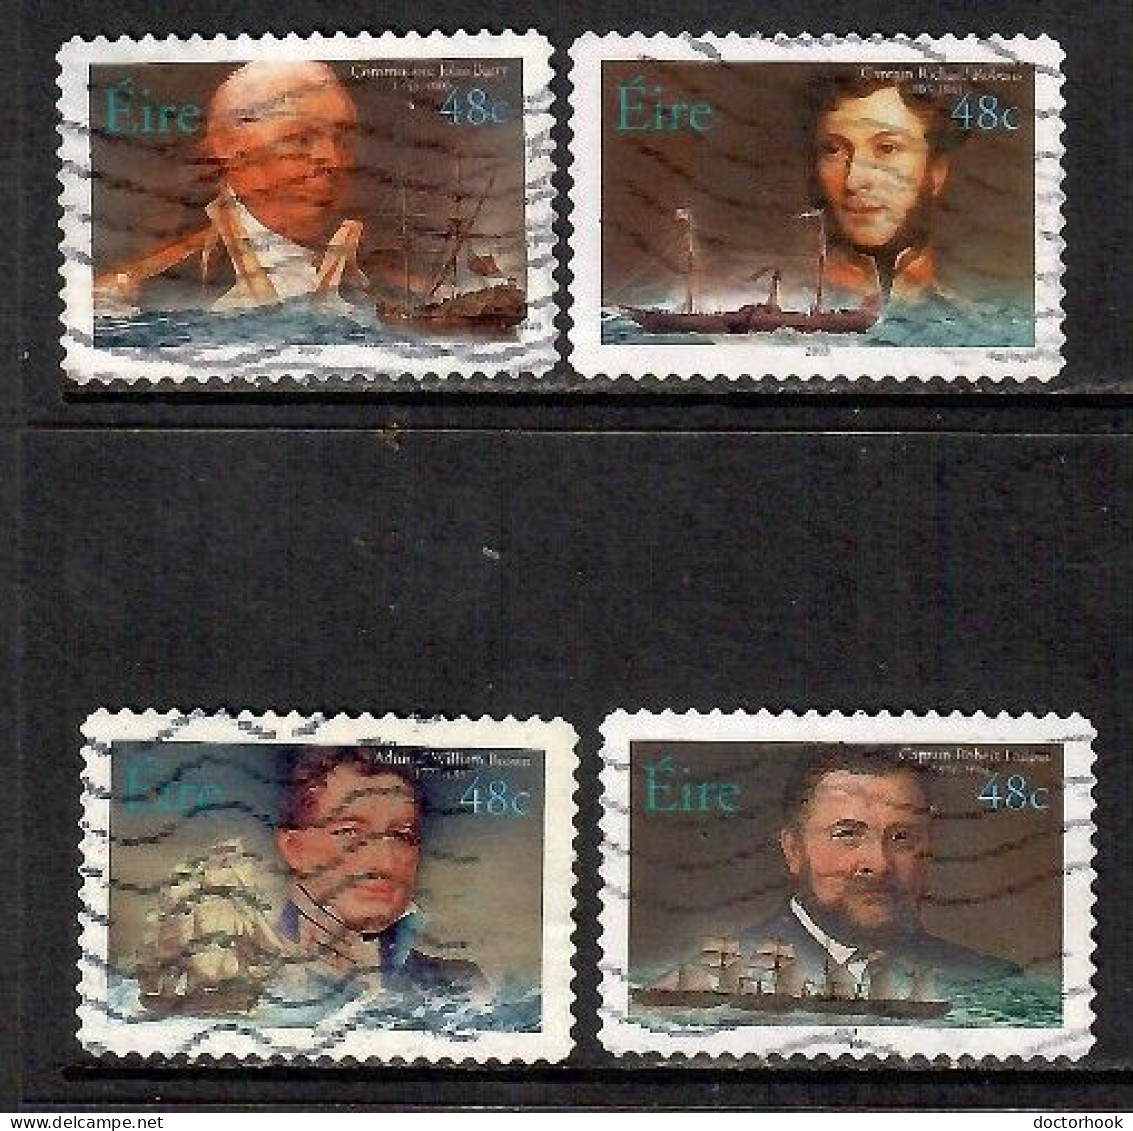 IRELAND   Scott # 1506-9 USED (CONDITION AS PER SCAN) (Stamp Scan # 992-9) - Used Stamps